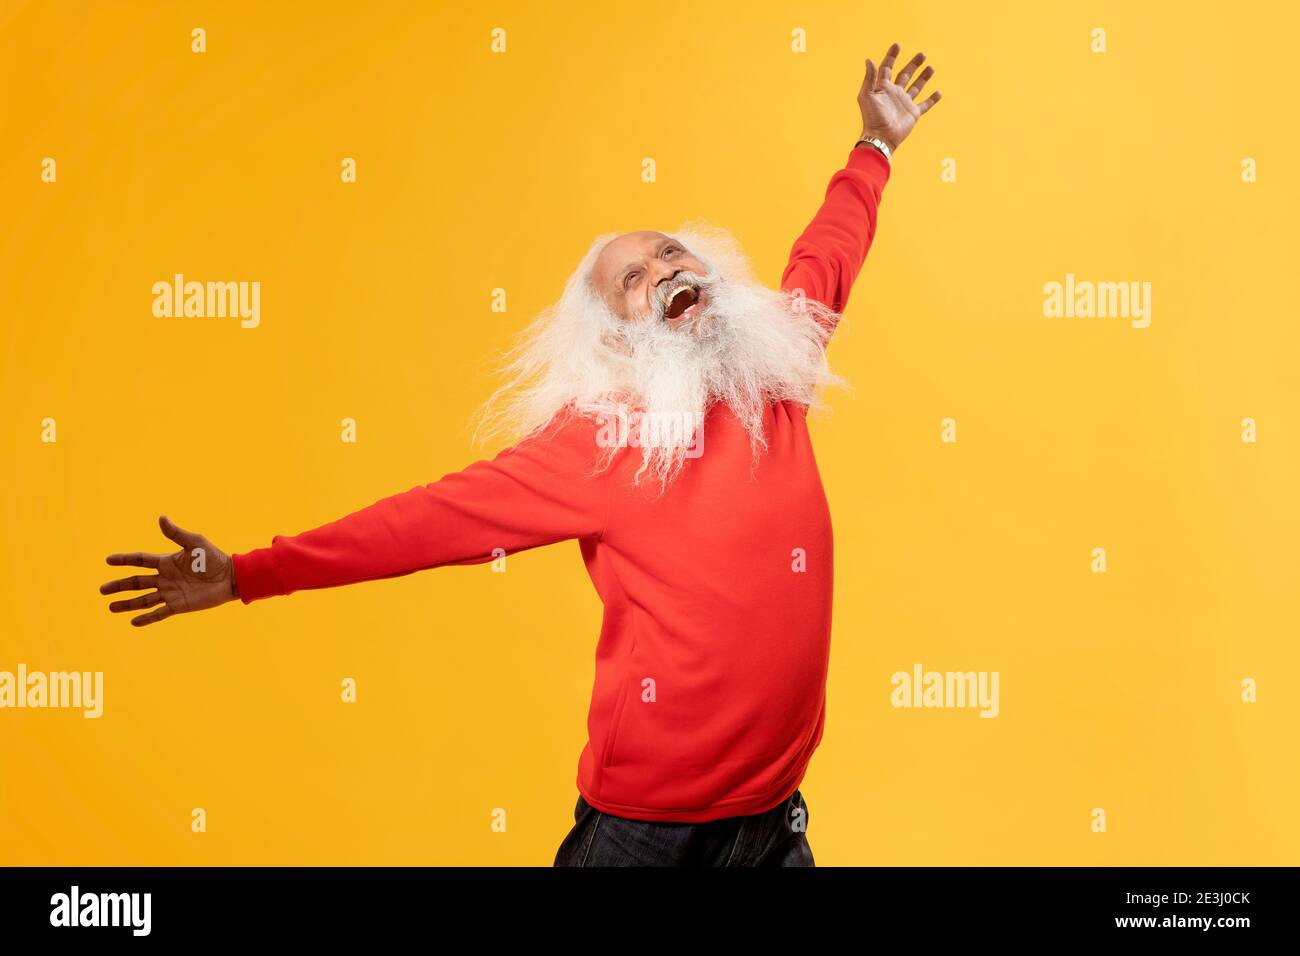 A CHEERFUL OLD MAN HAPPILY RAISING ARMS AND LOOKING ABOVE Stock Photo